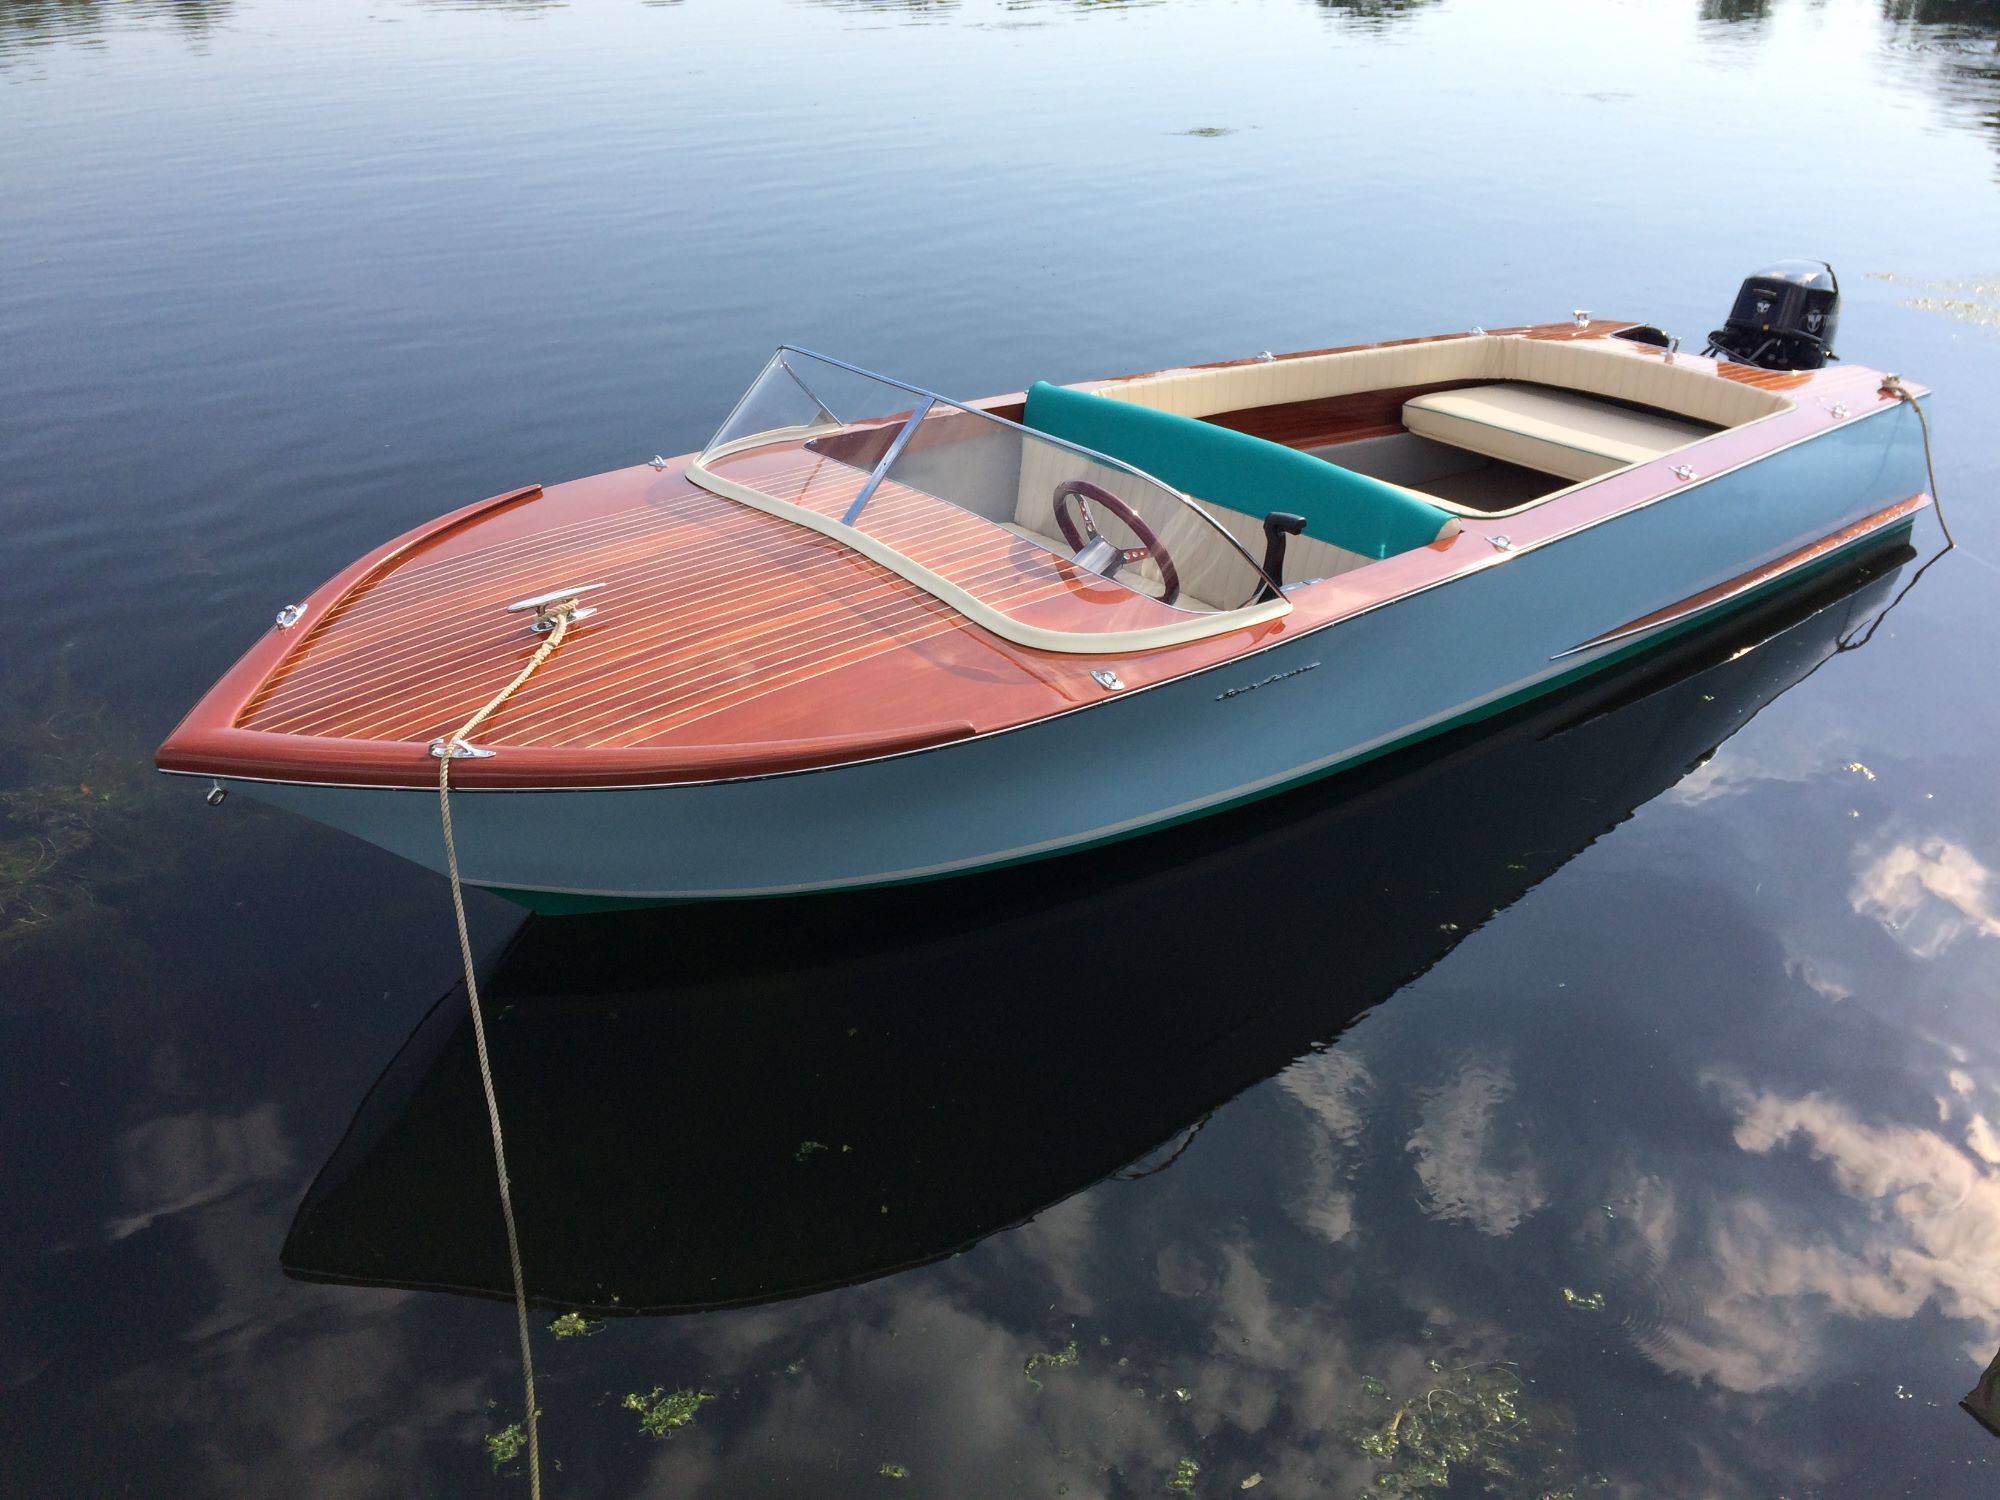 wooden boat for sale